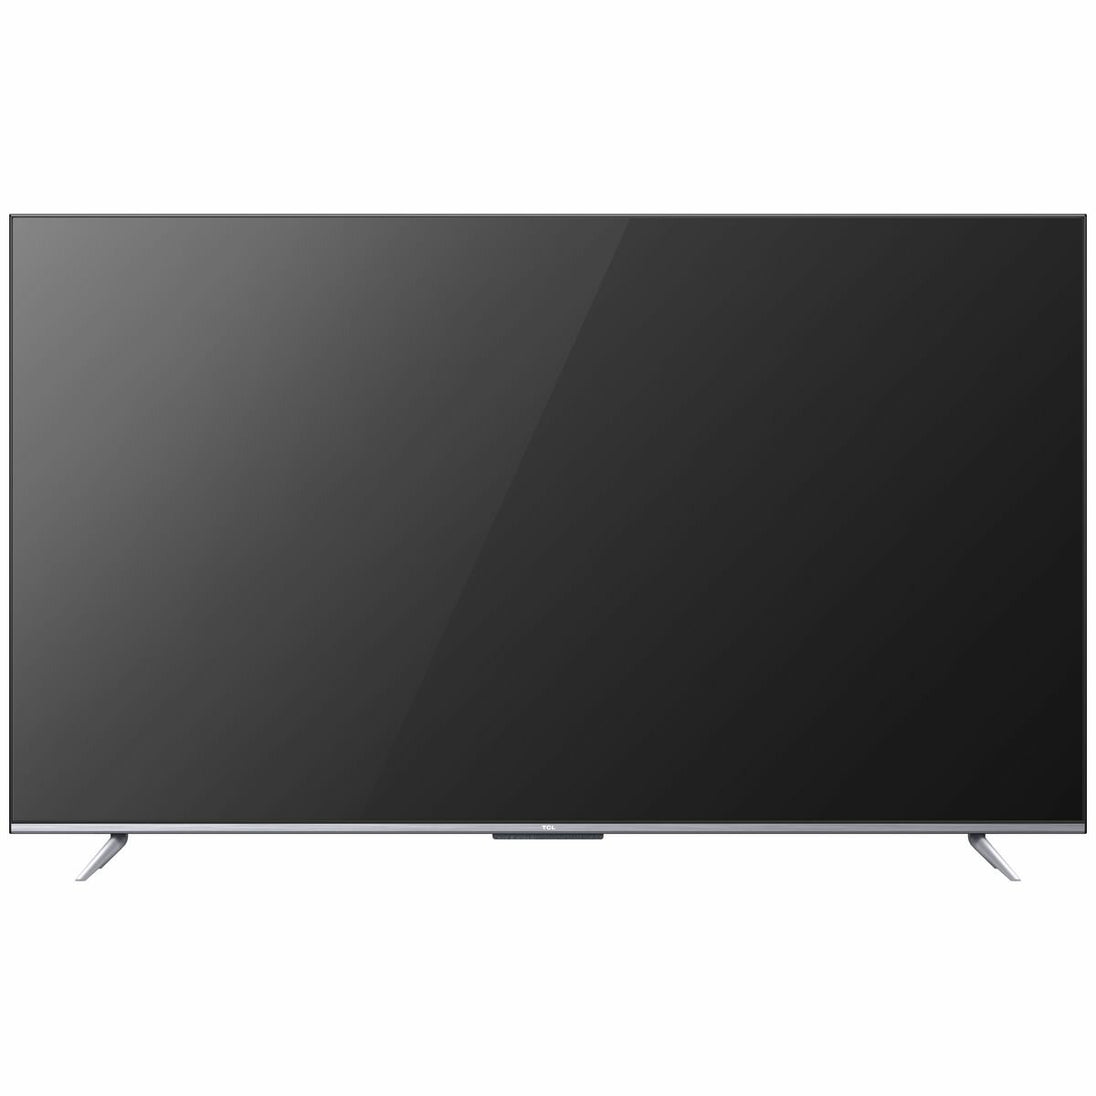 tcl-75-inch-p725-4k-uhd-hdr-smart-android-tv-75p725-2-b35f1959-high